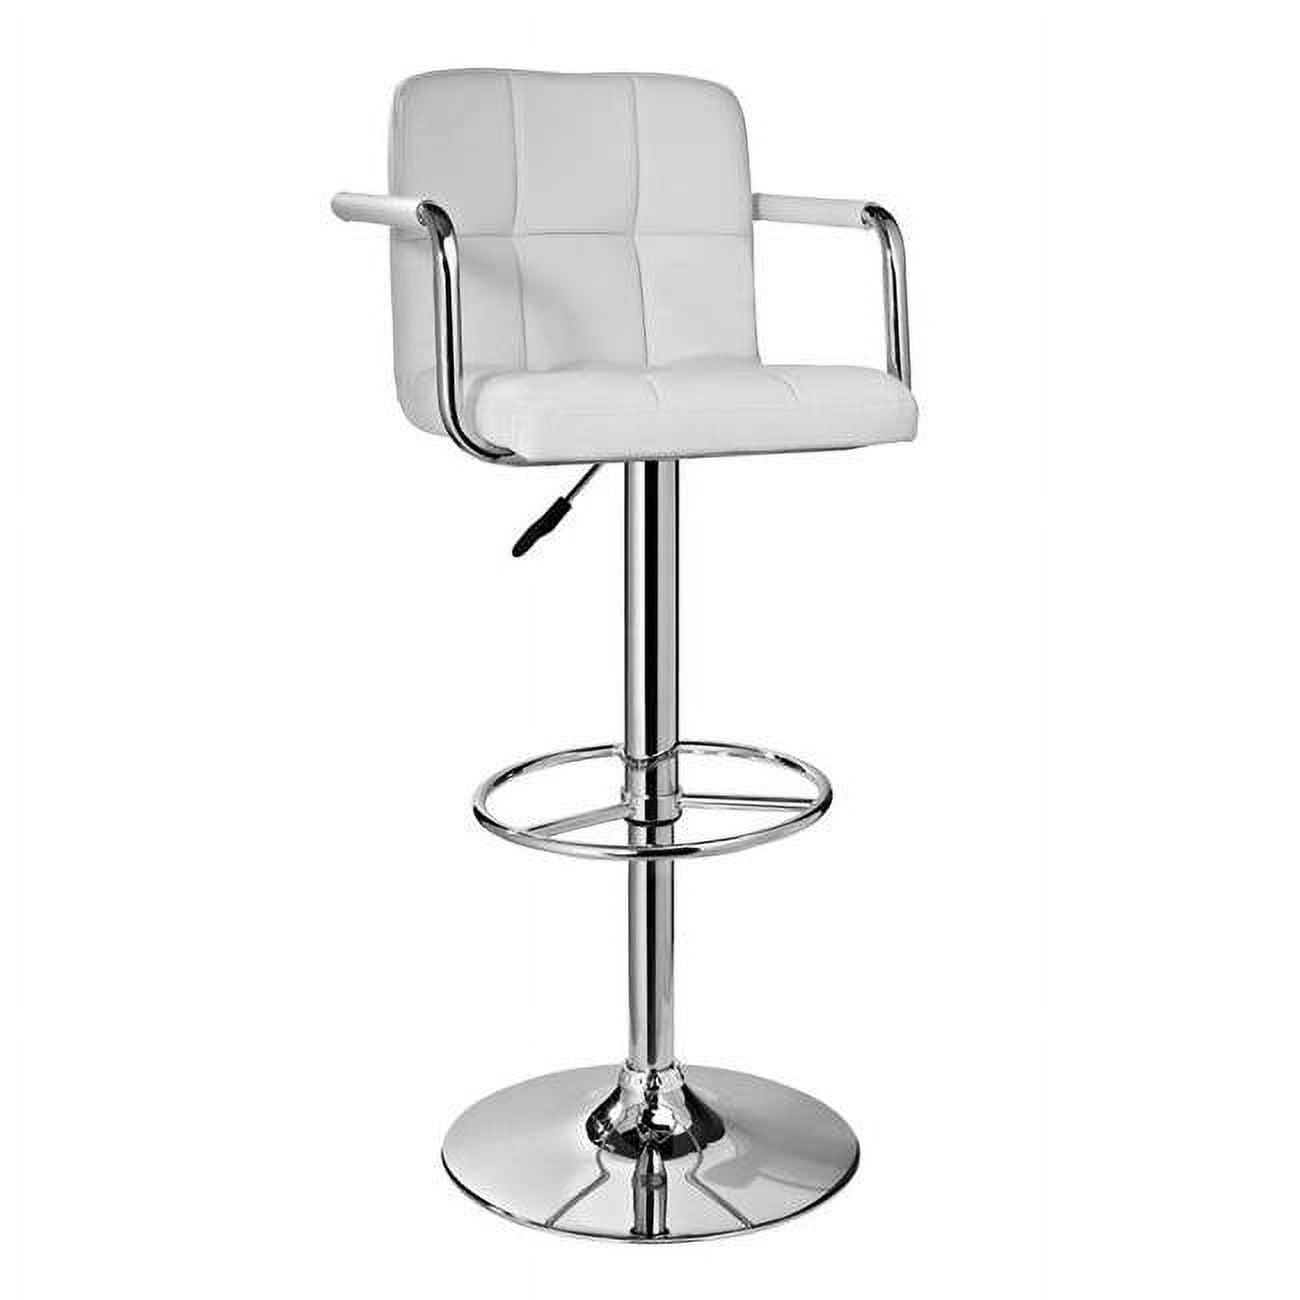 Boyd Adjustable White Faux Leather Swivel Bar Stool with Chrome Metal Base